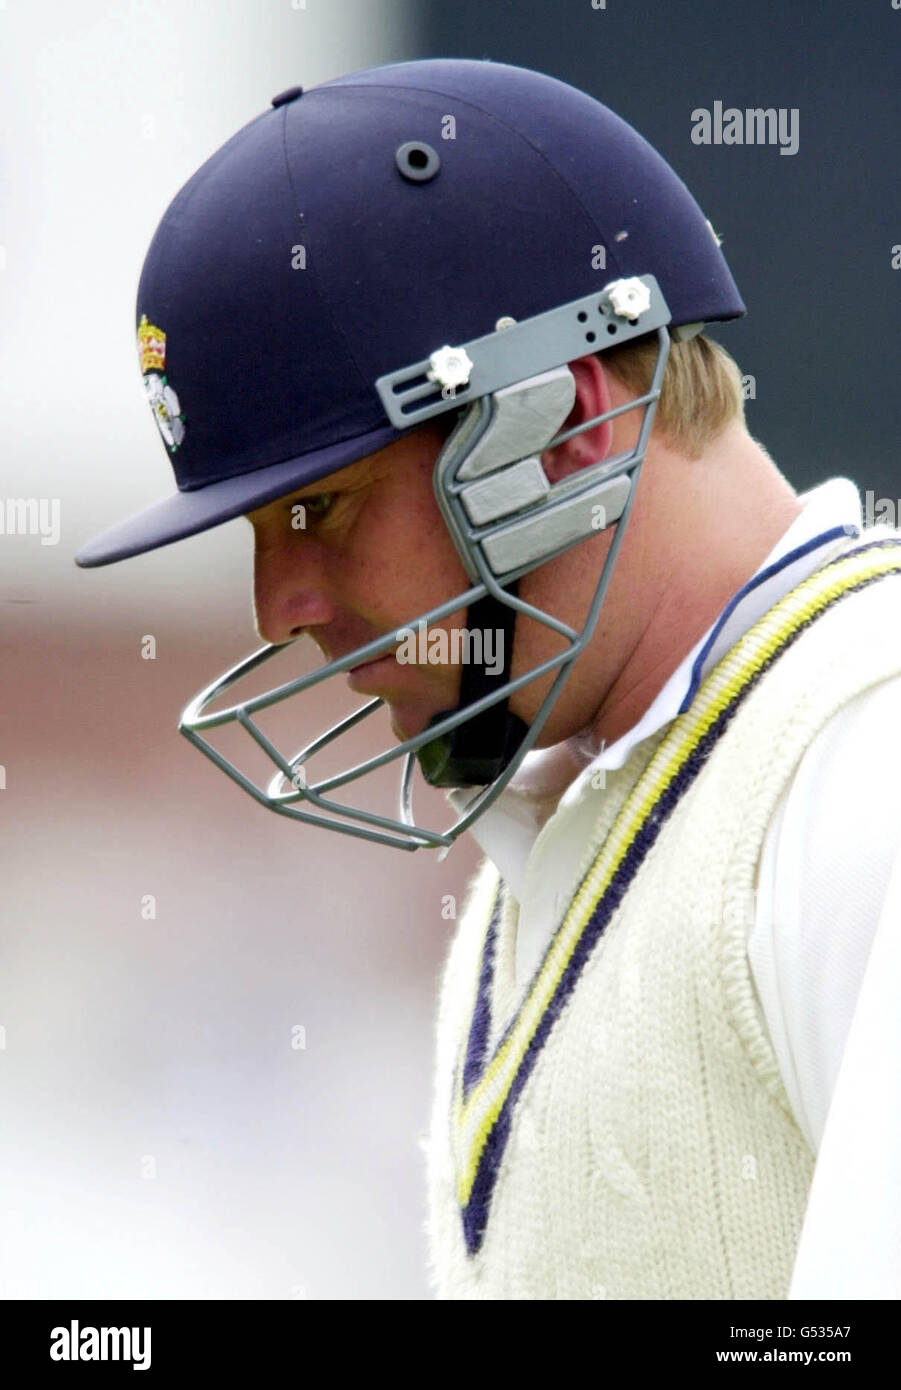 Hamphire's Shane Warne after being bowled out by Derbyshire's Simon Lacey for 12 runs during their Championship match. Warne has been stripped of the Australia vice-captaincy following revelations that he had bombarded an English nurse with lewd phone messages. Stock Photo